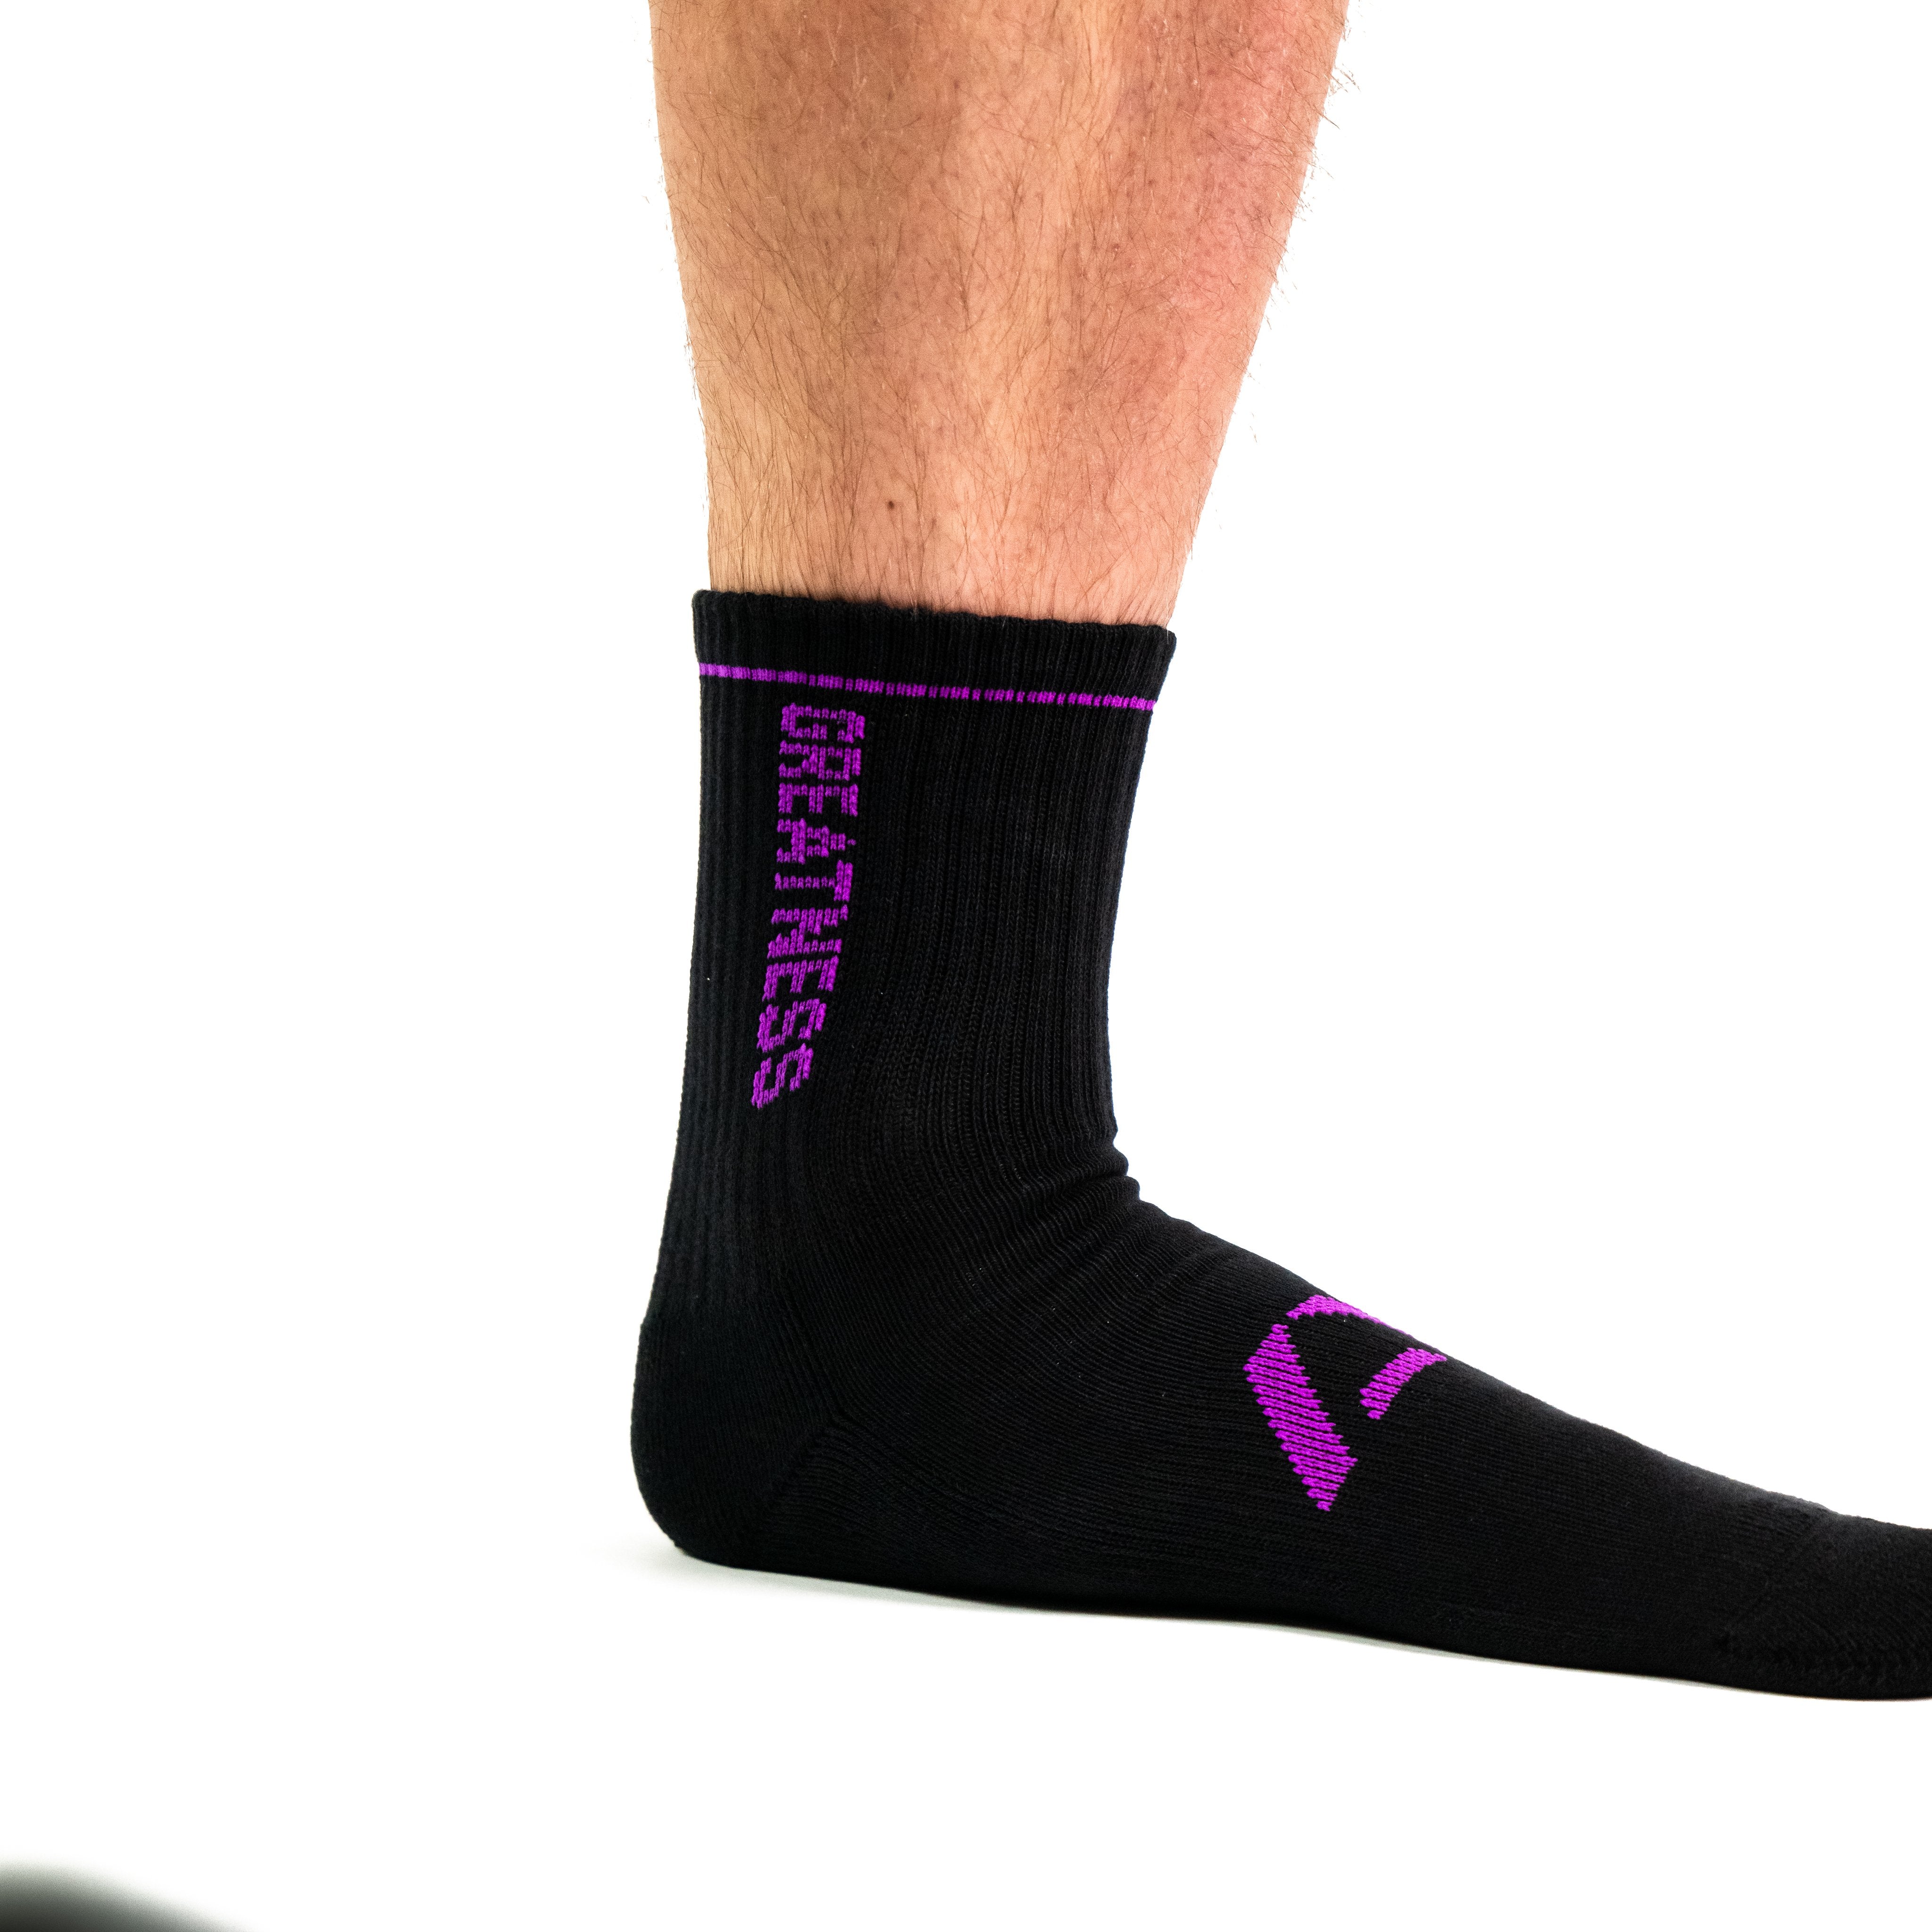 Standout from the crowd in our Purple Crew socks and let your energy show on the platform, in your training or while out and about. Our Crew socks offer a level of comfort like no other through their unique blend of materials and stretch in the places you desire for an ultra comfortable sock.